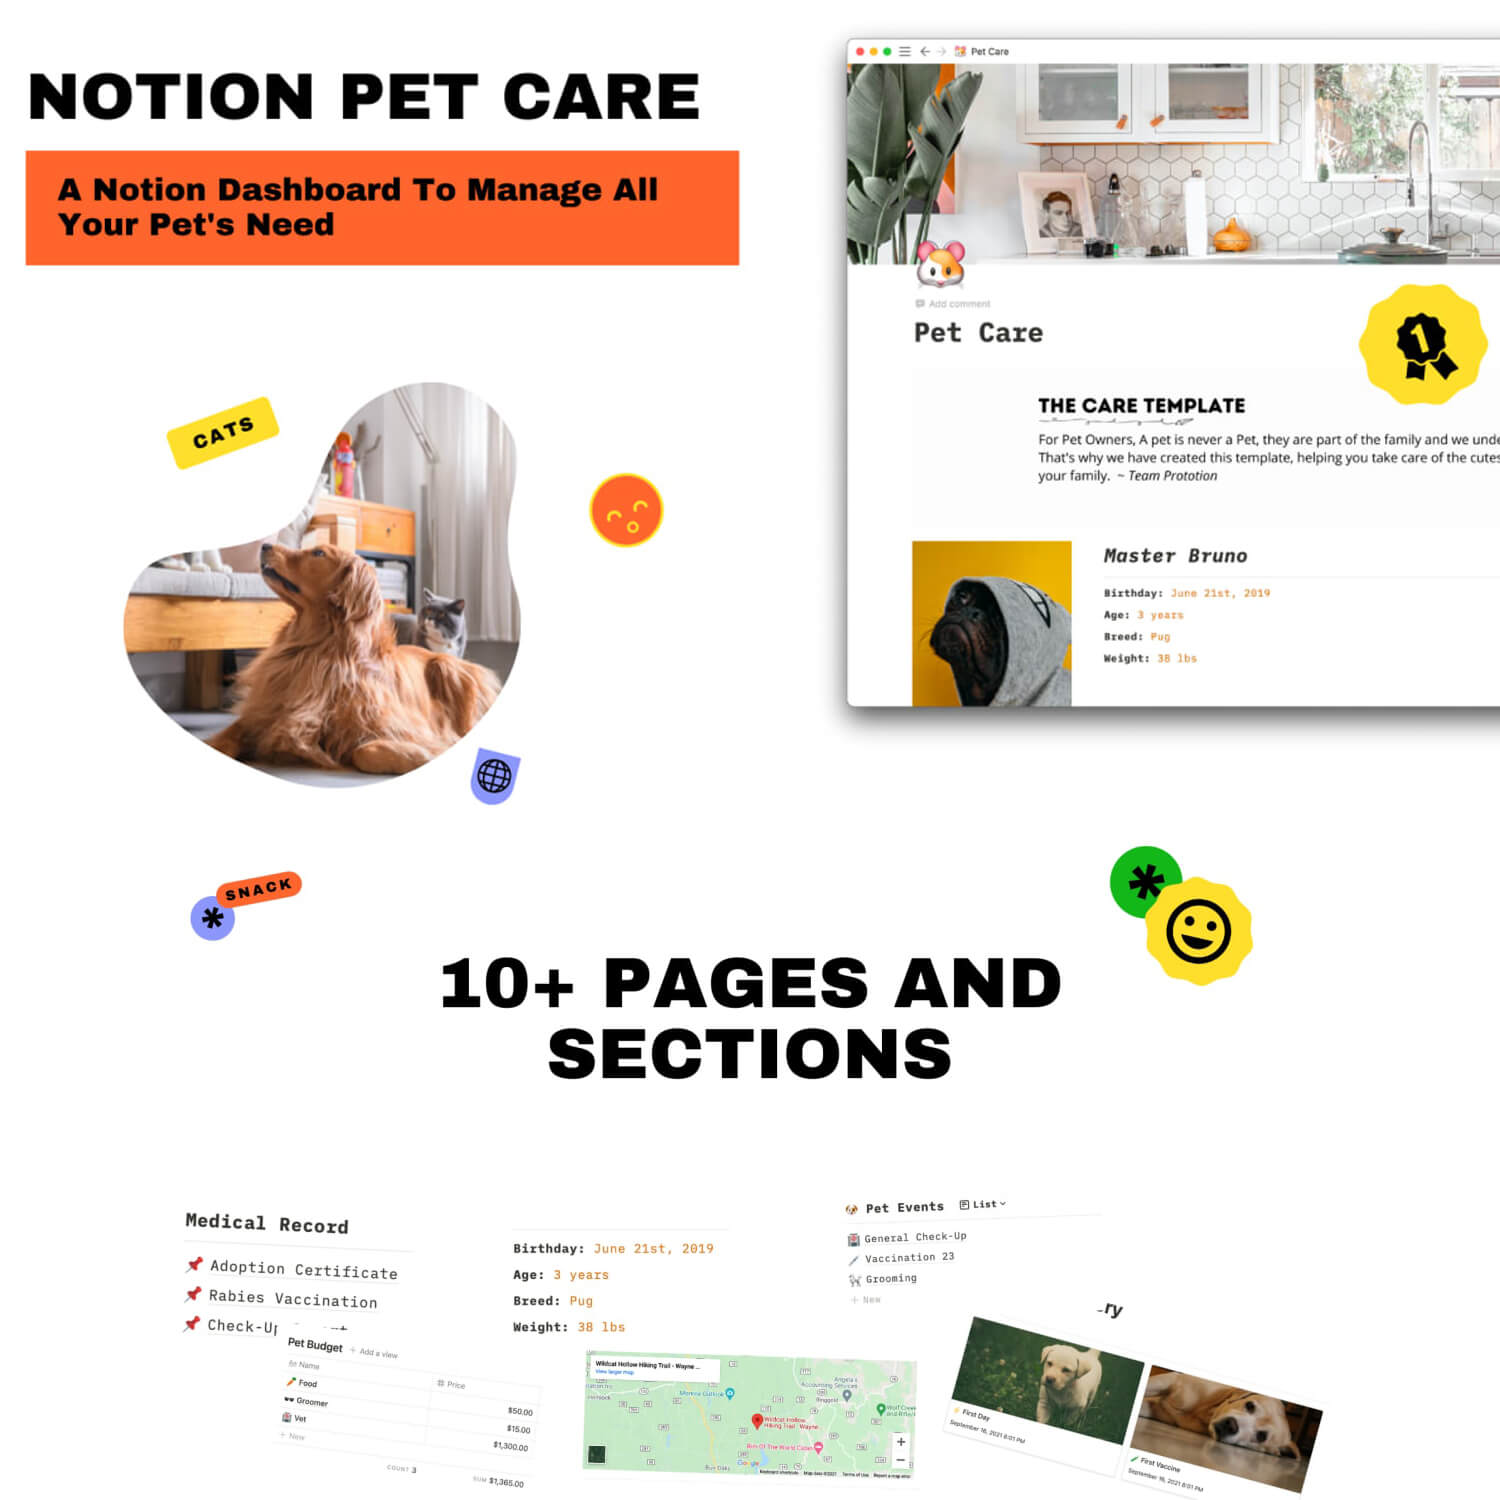 Slides about the pet care template.